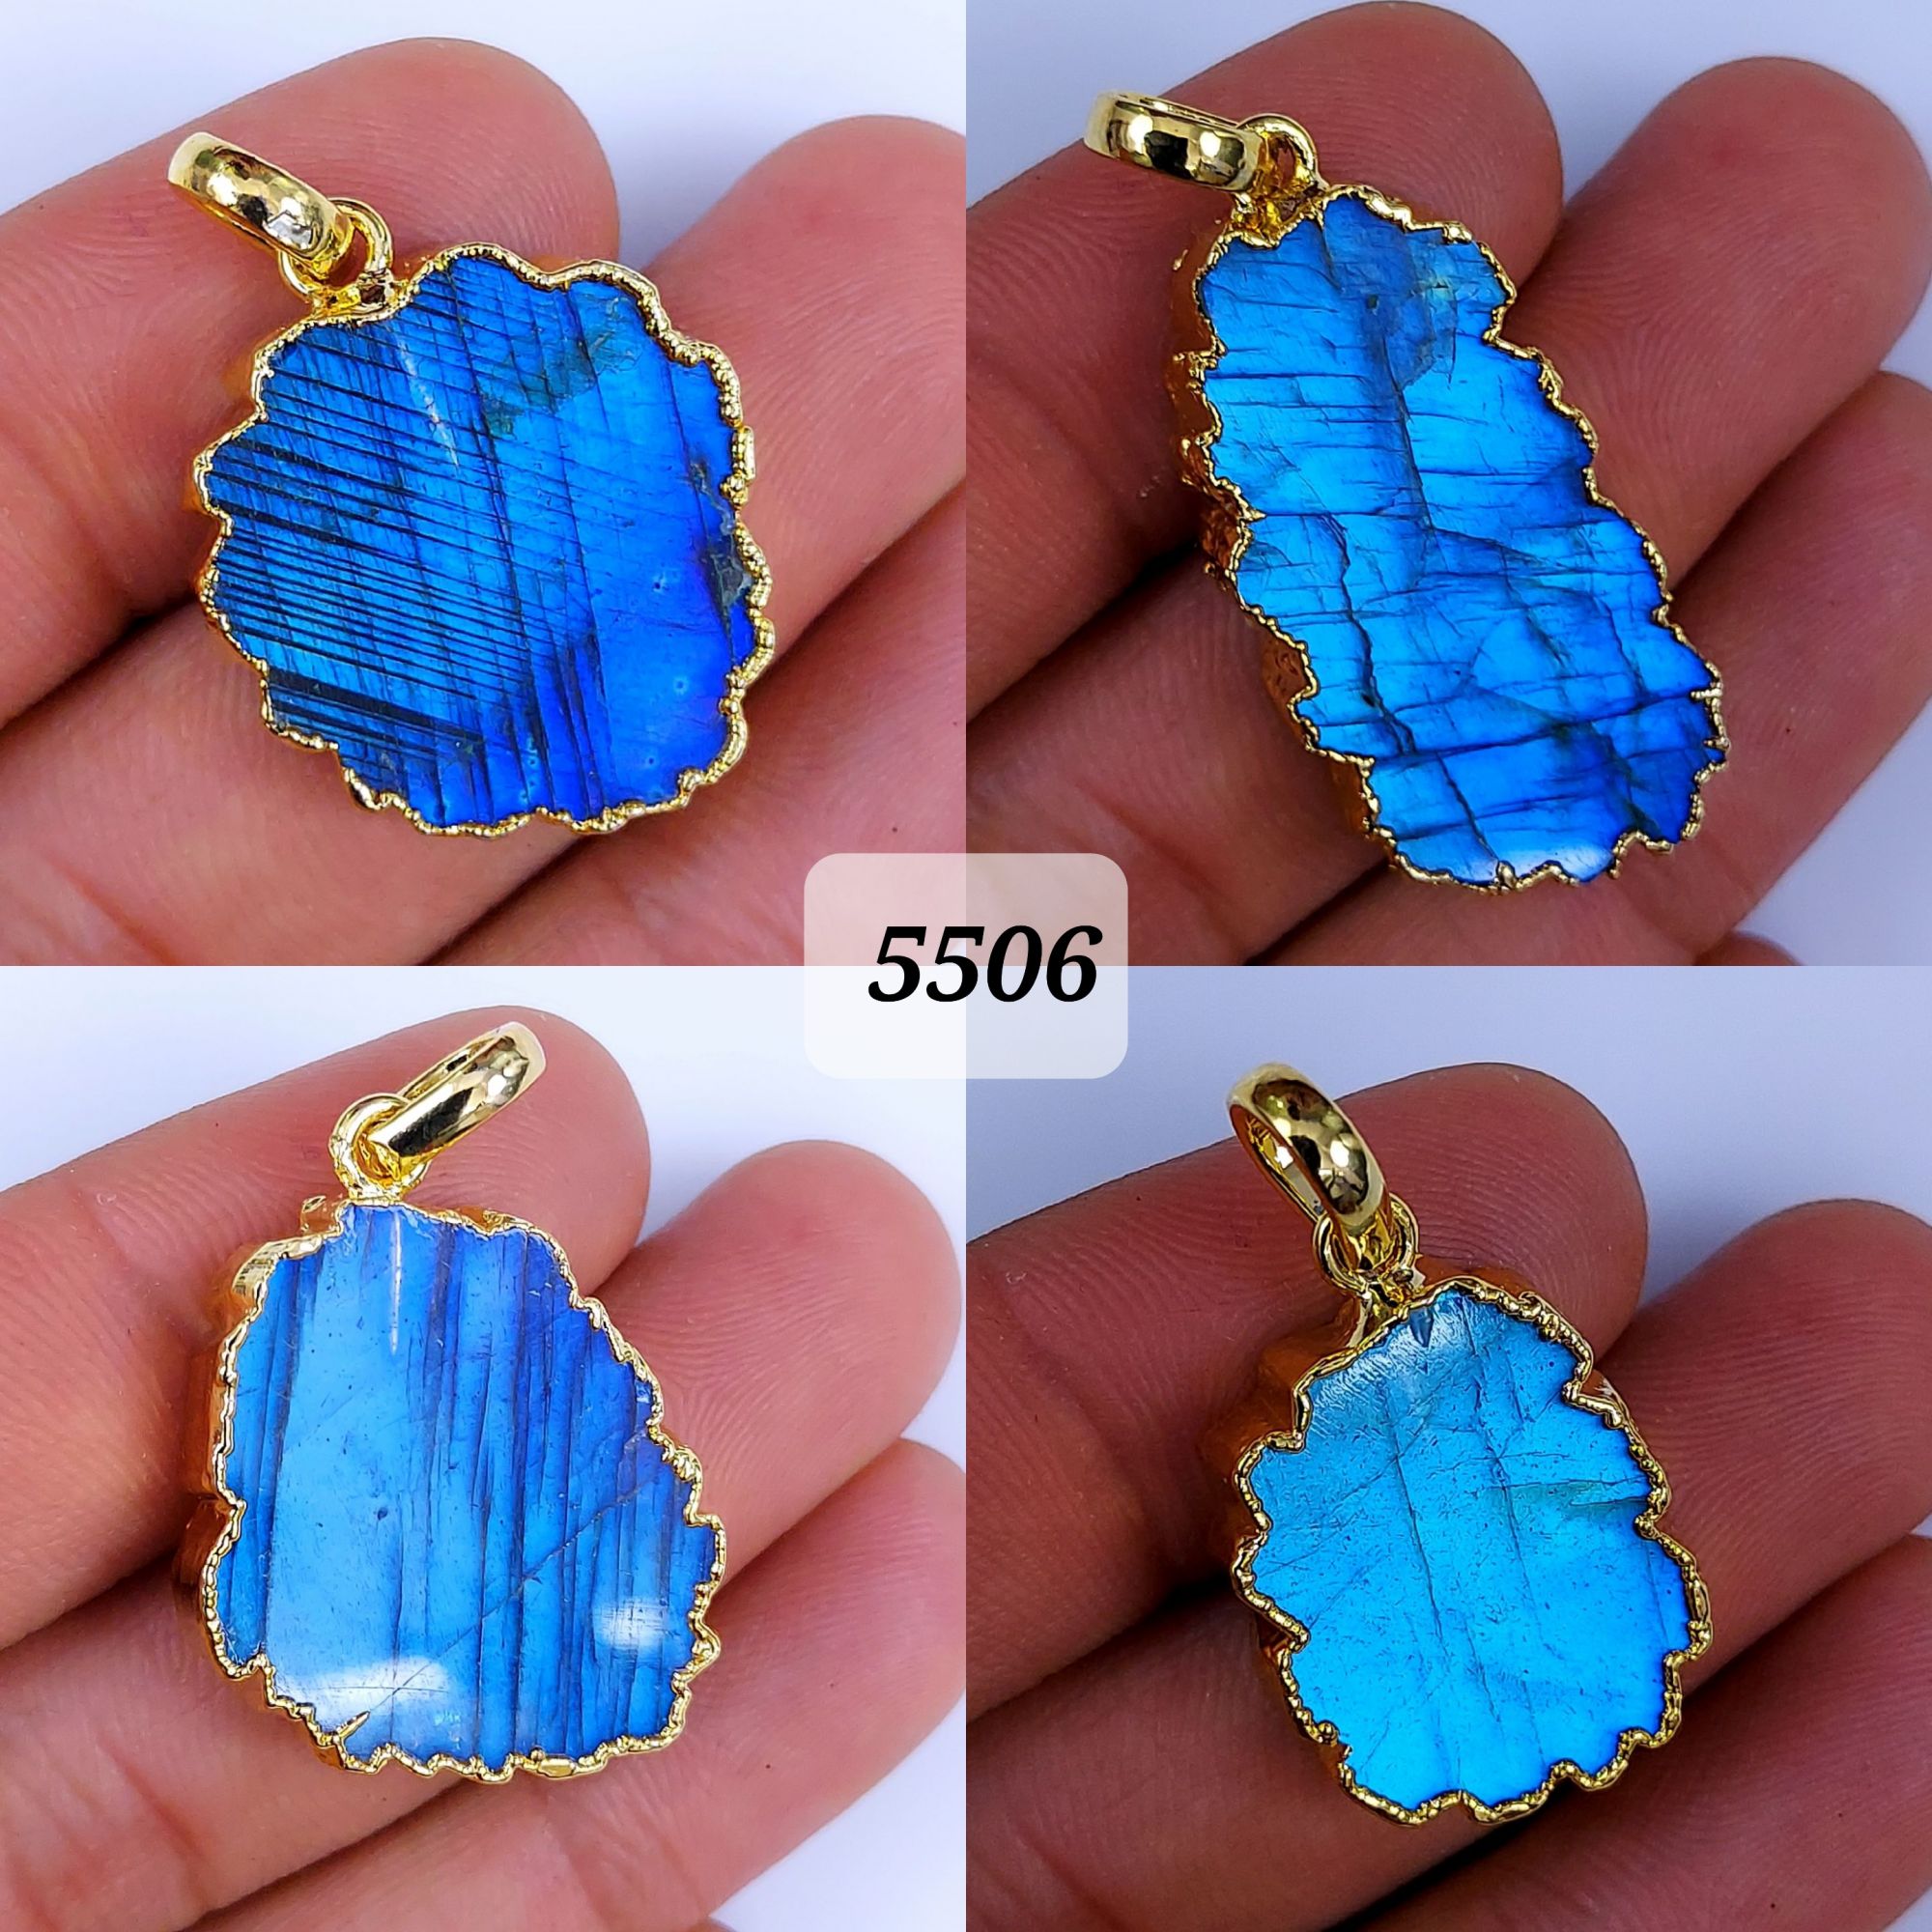 4Pcs 129Cts Natural Labradorite Slice Connector Pendant Bezeled Gemstone Pendant Electroplated Slice Layering Jewelry Gold Plated Choker 32x18 22x12mm